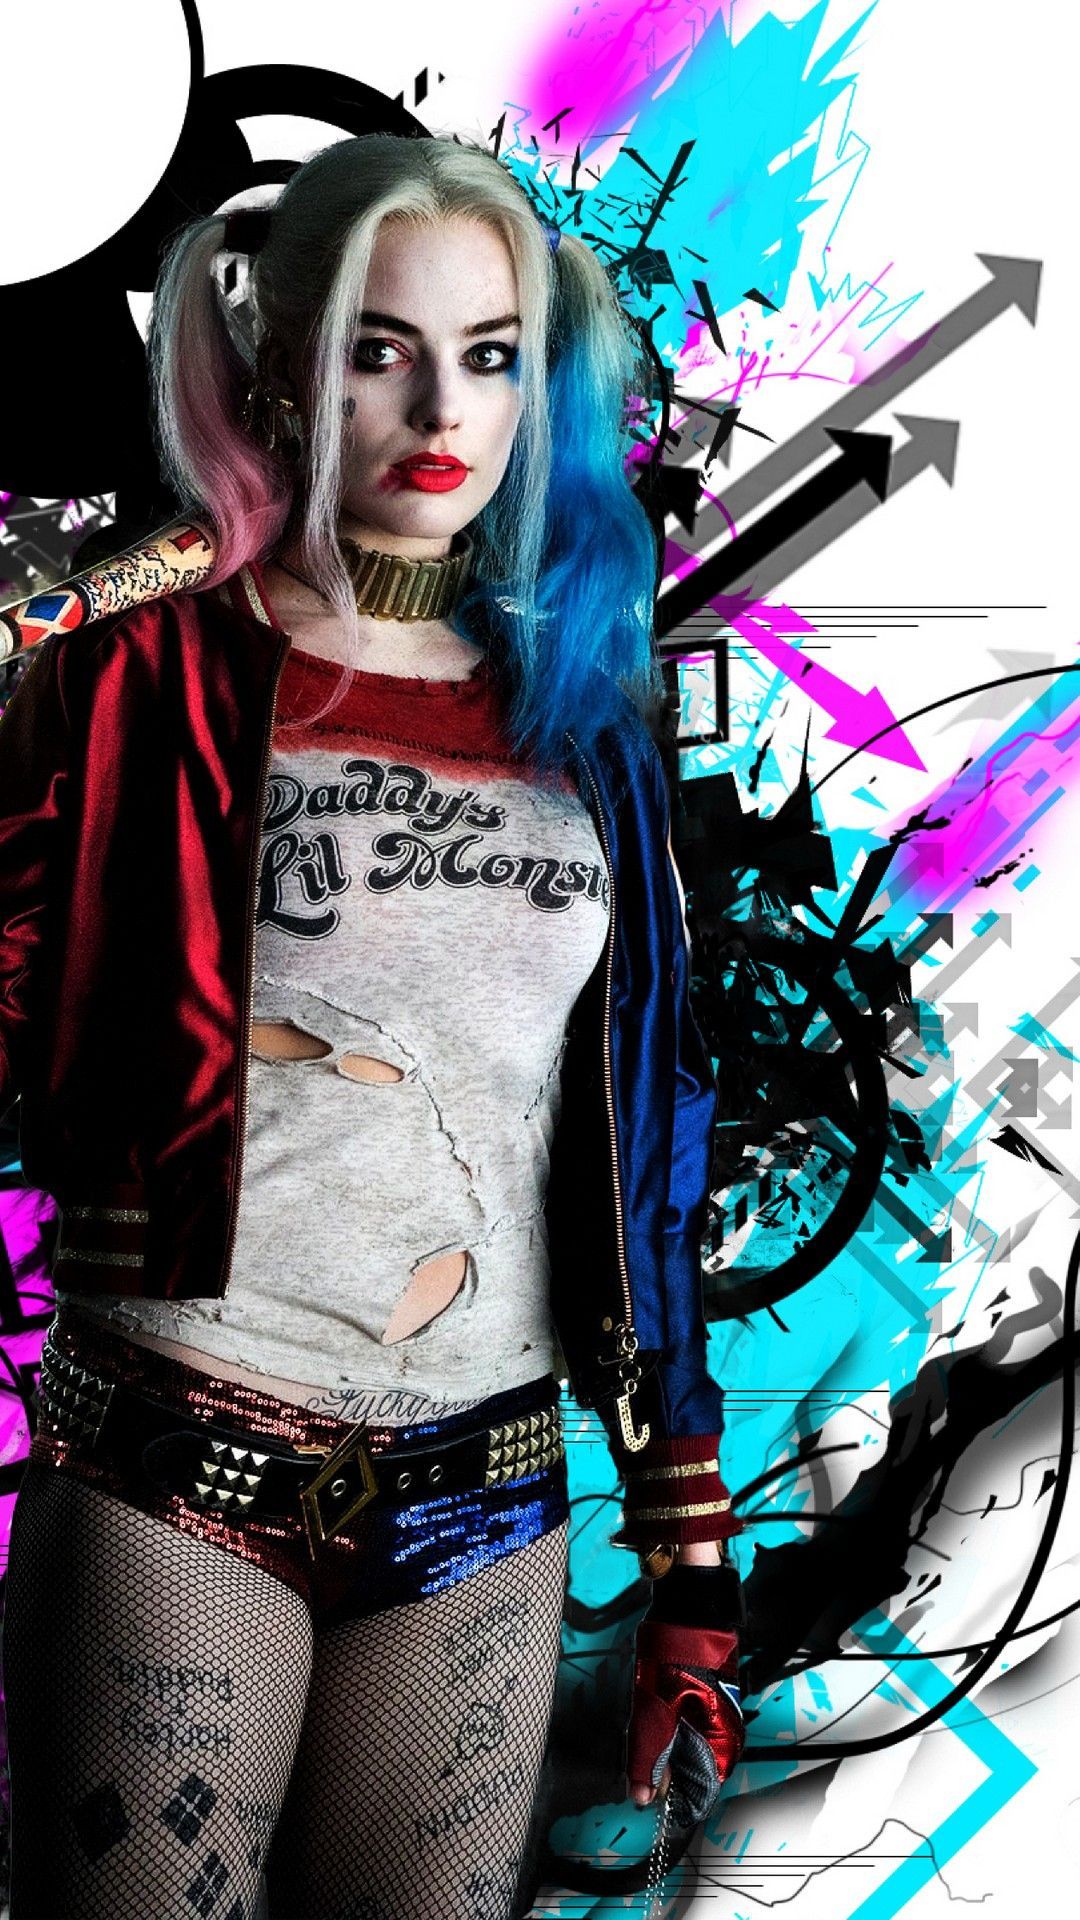 Best of Google show me a picture of harley quinn